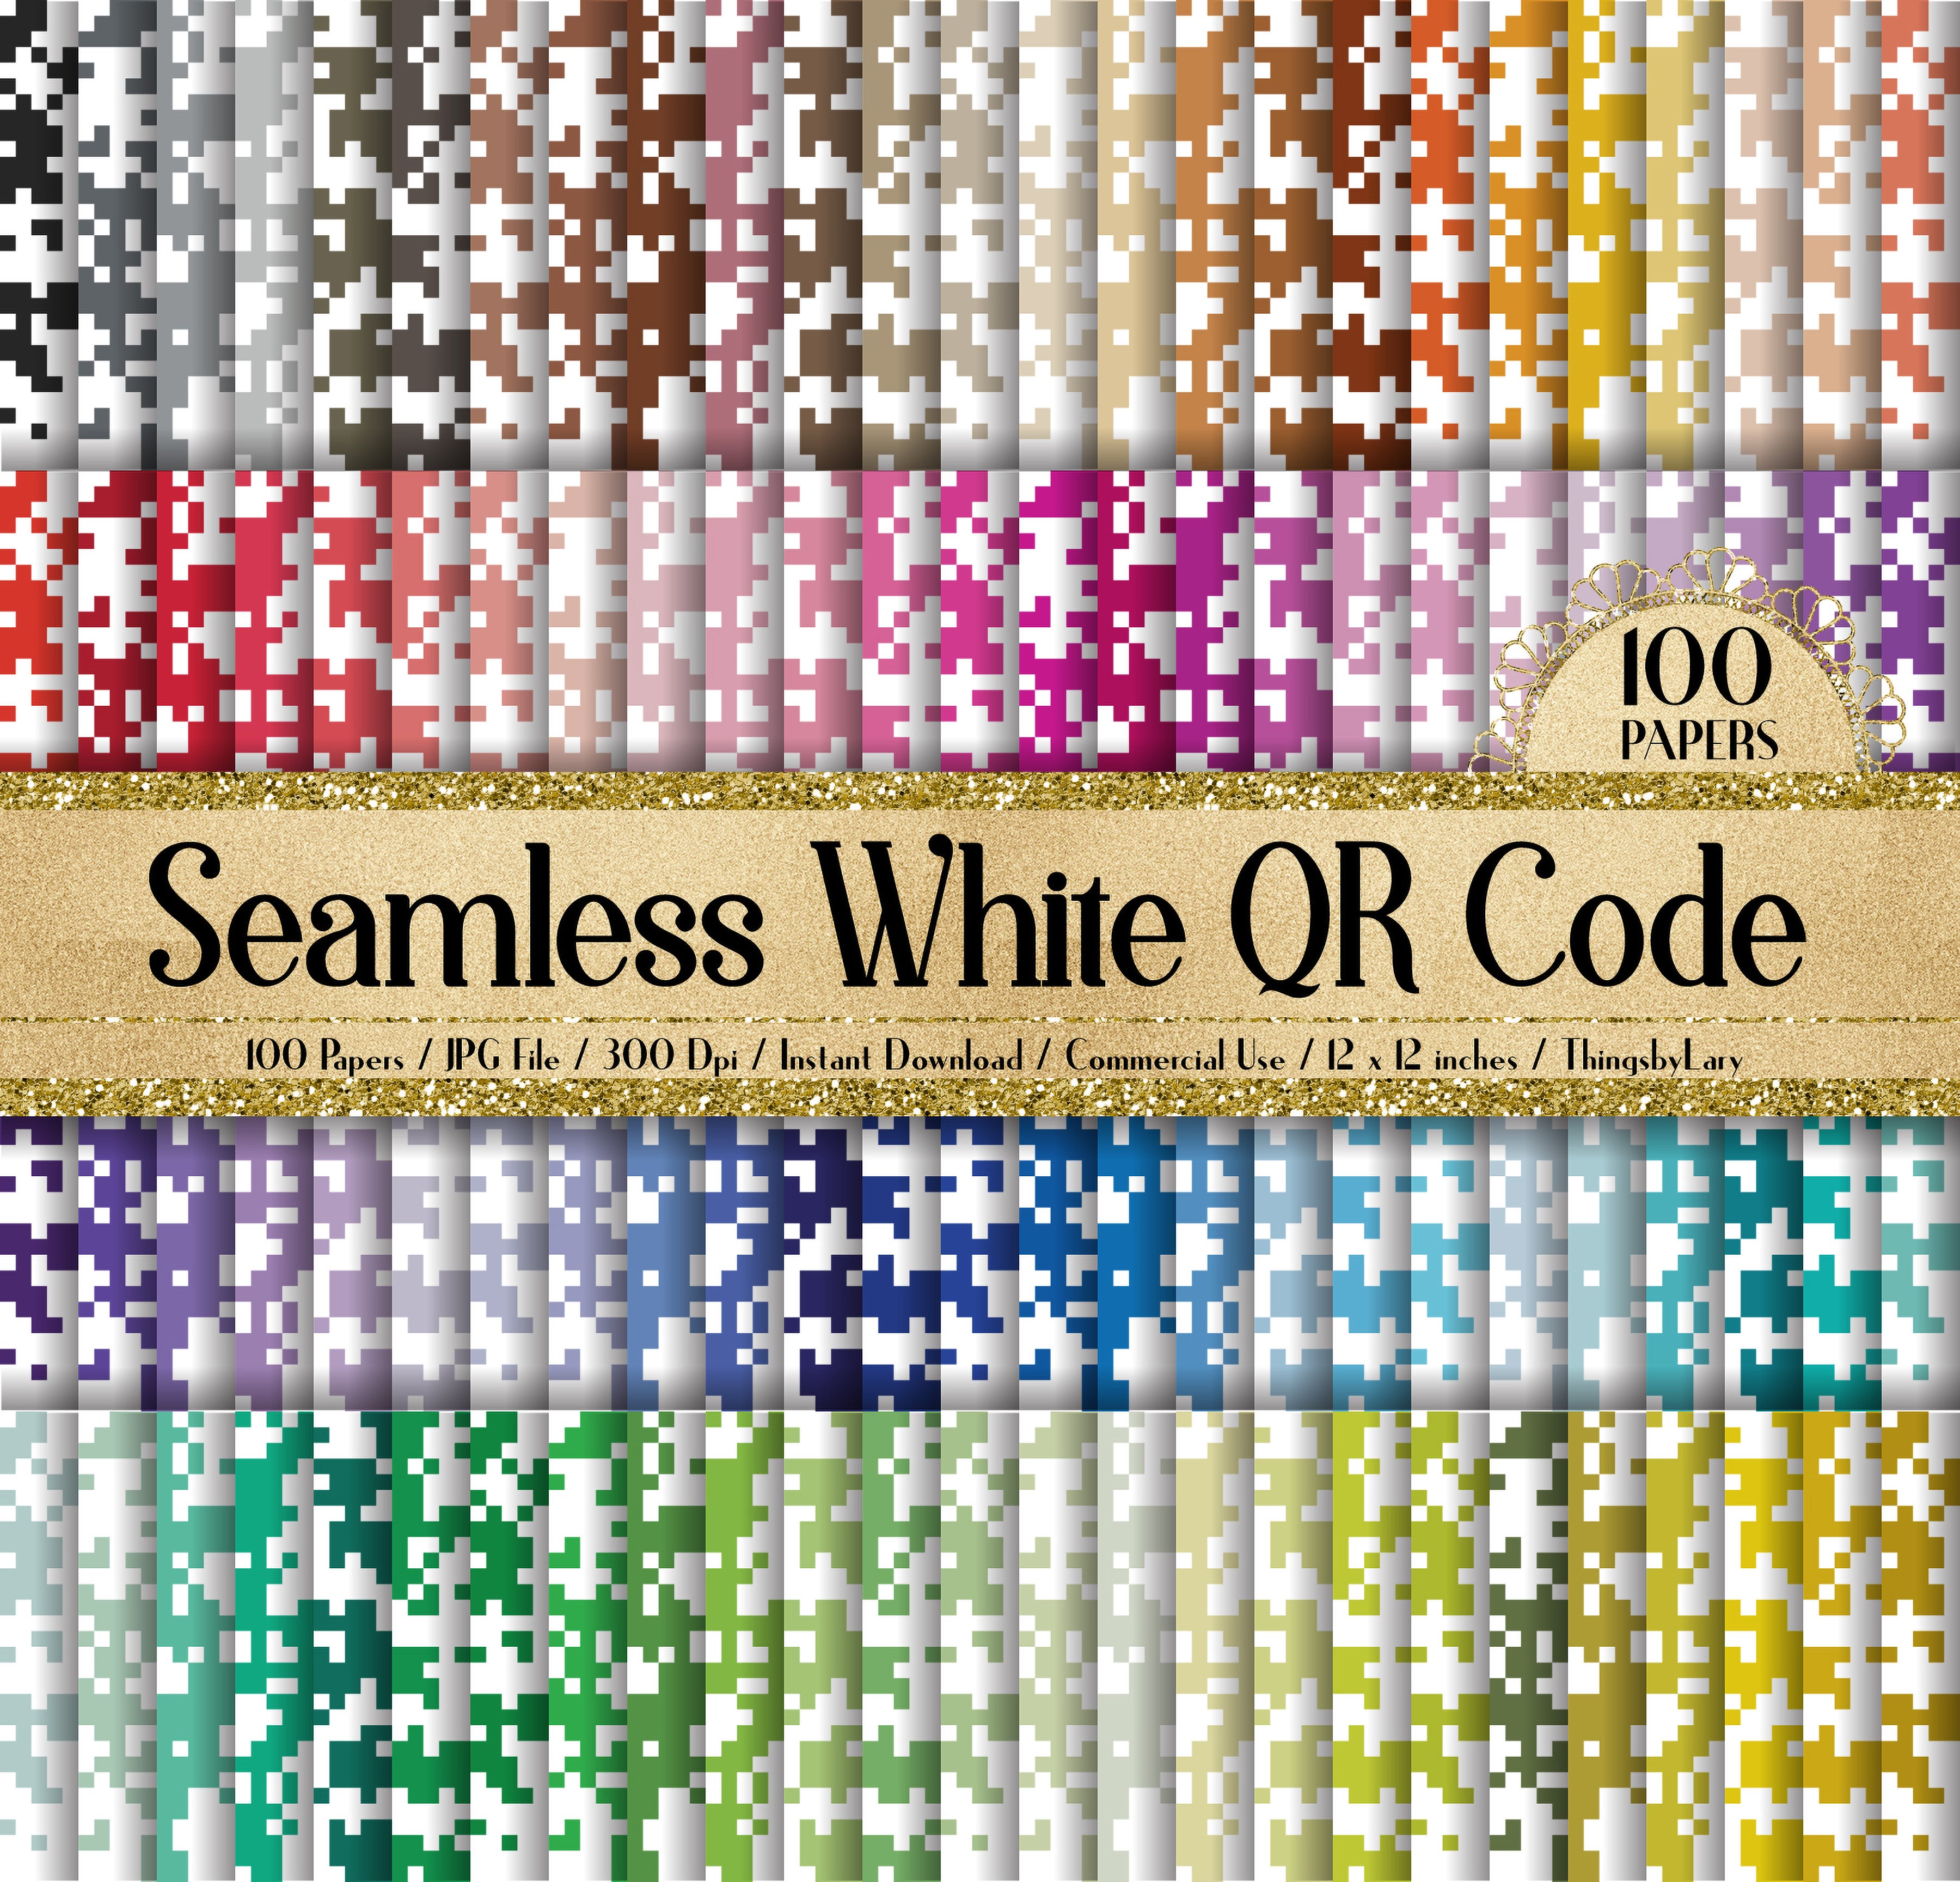 100 Seamless White QR Code Digital Papers